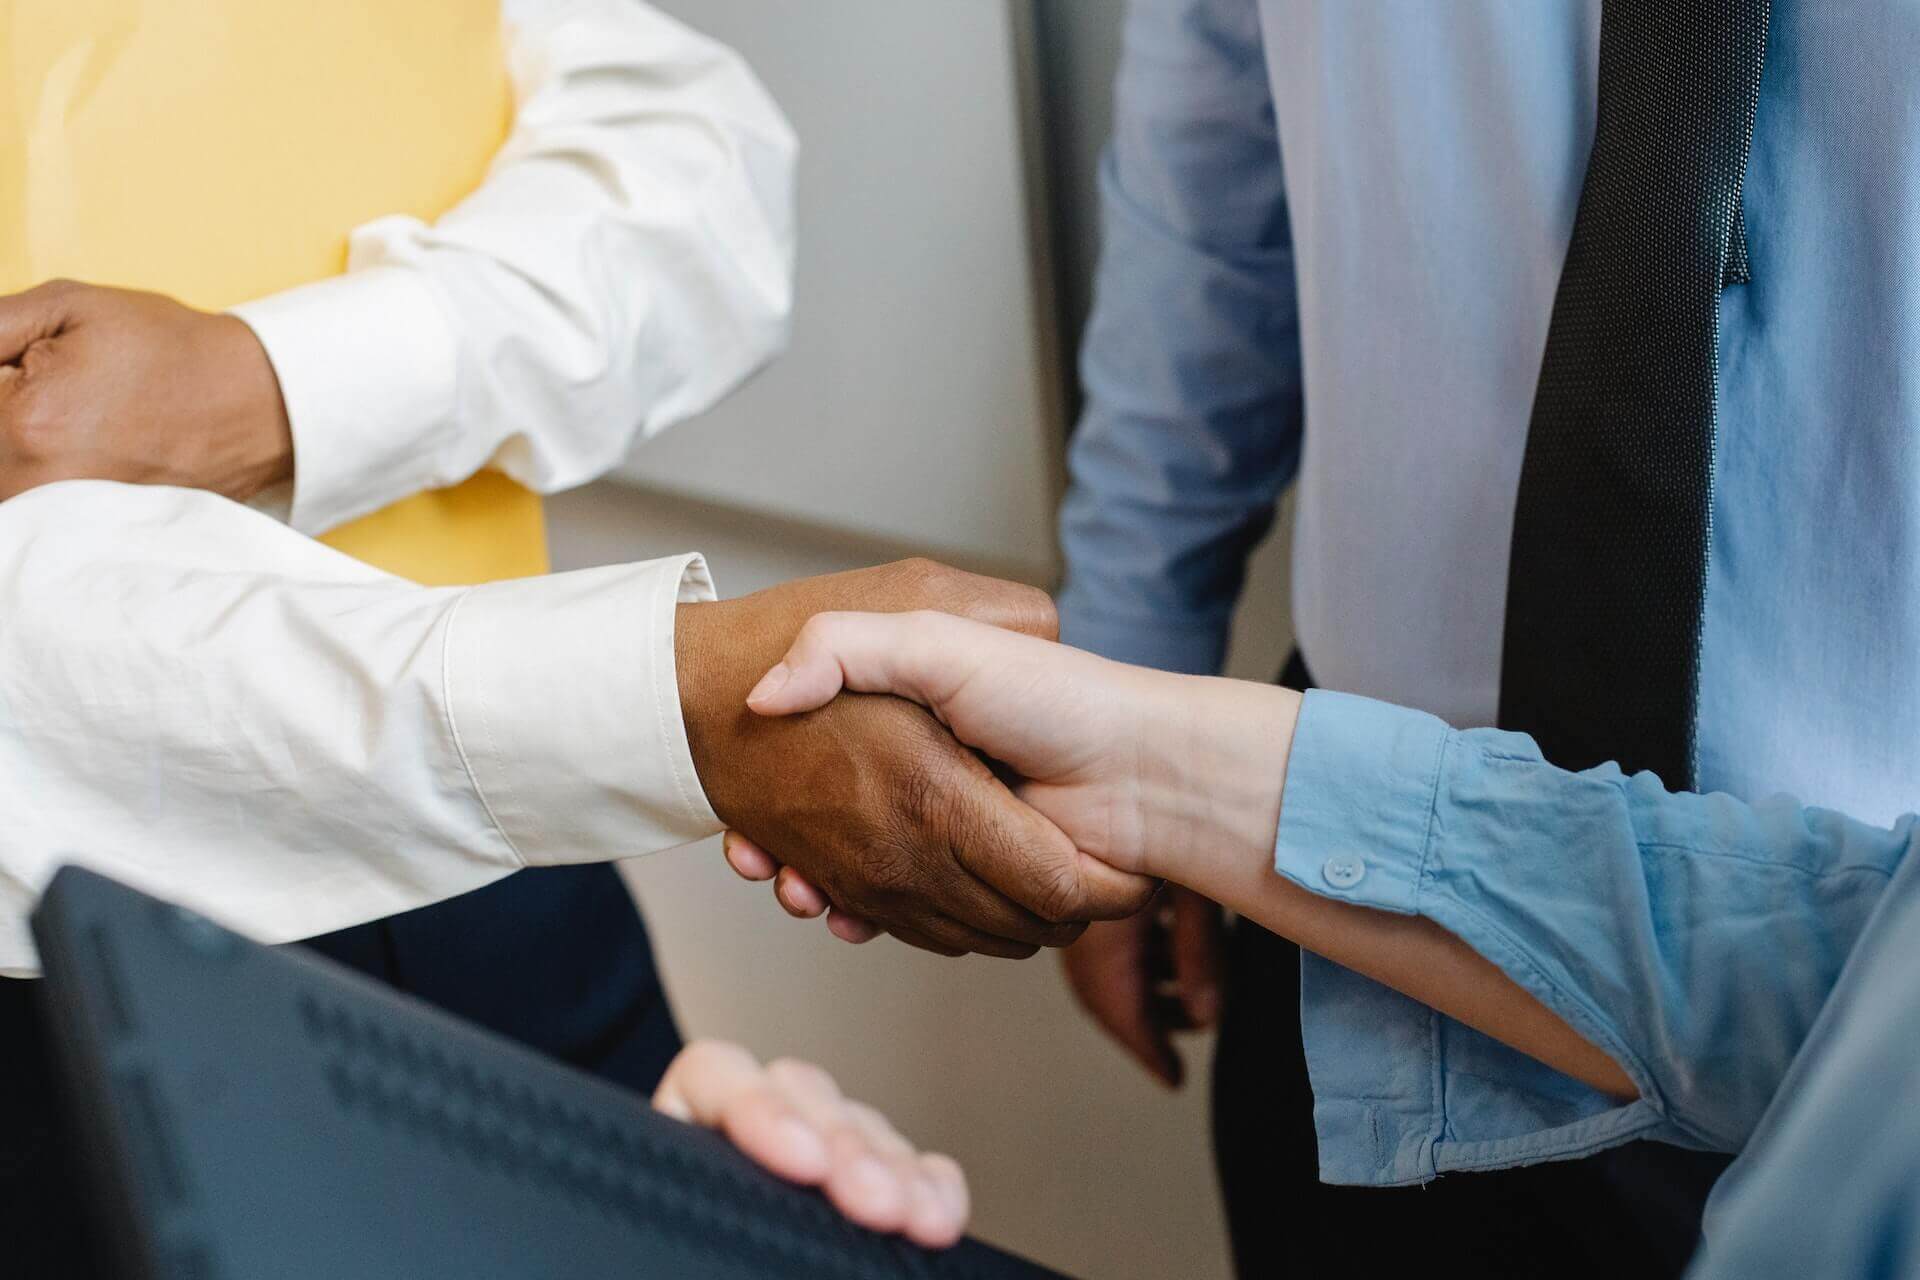 Two people shaking hands to seal a deal.